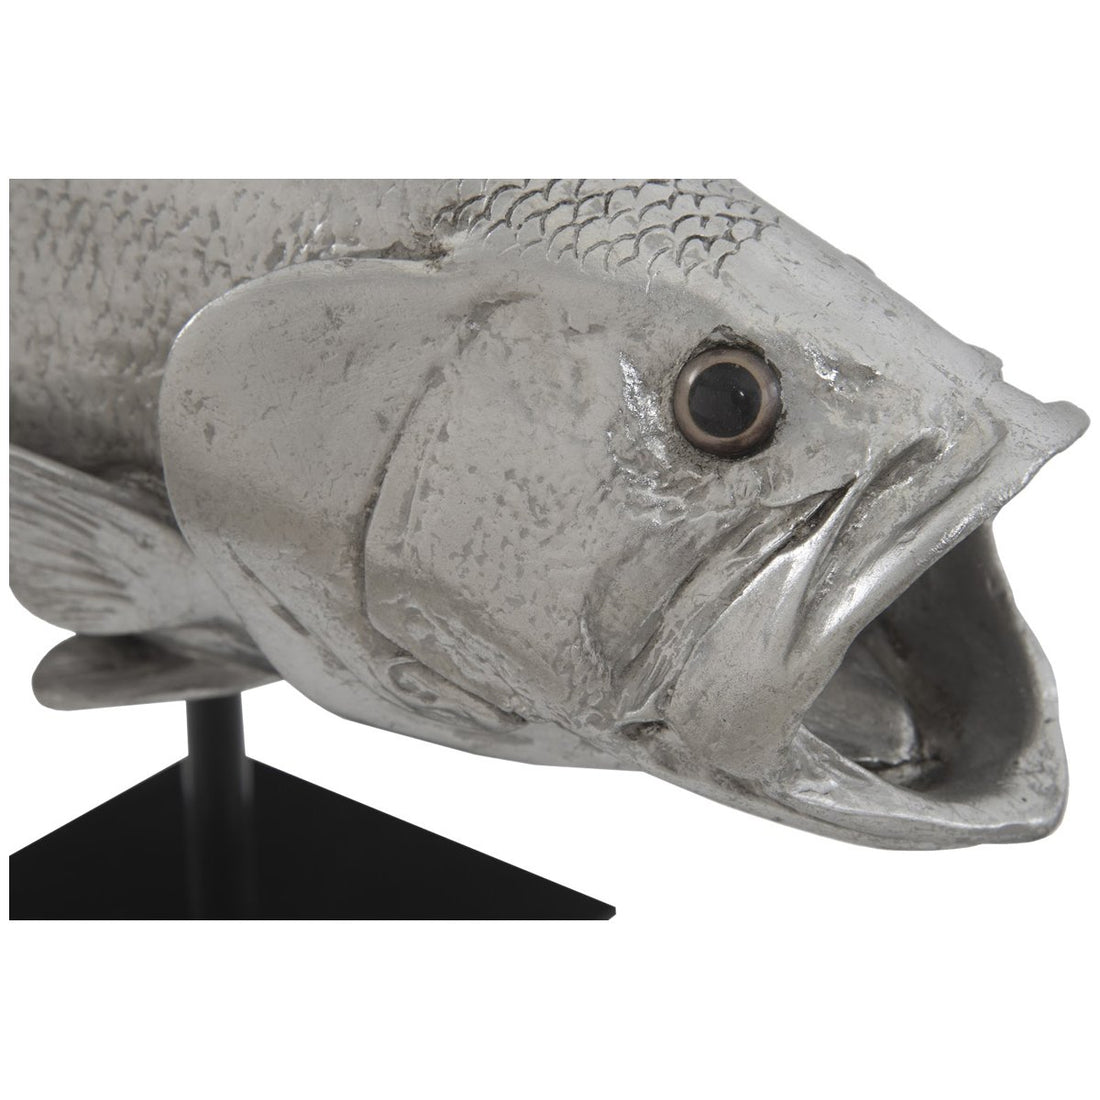 Phillips Collection Large Mouth Bass Fish, with Stand